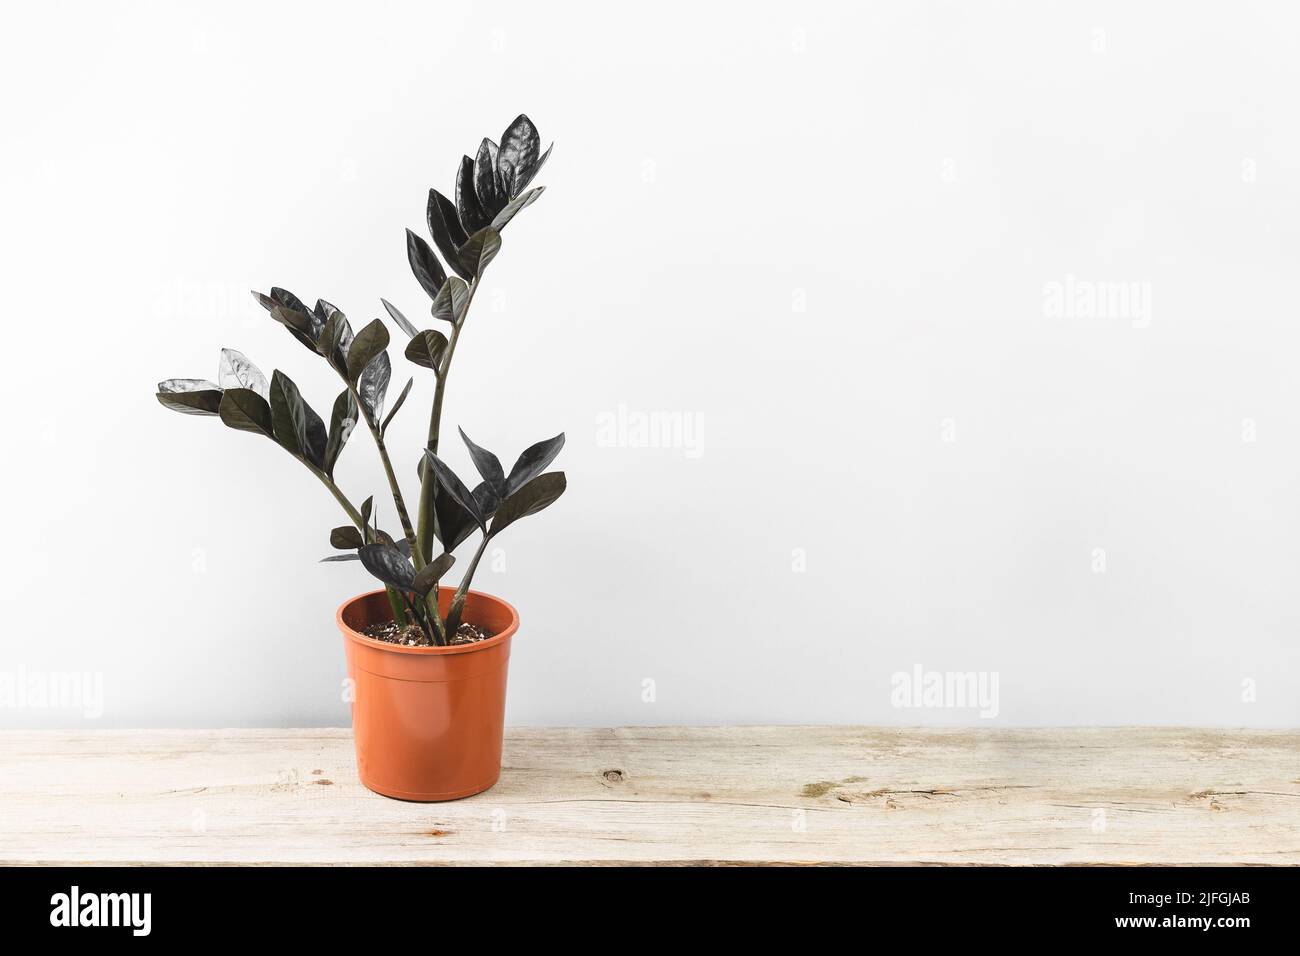 Zamioculcas Zamiifolia Raven, potted house plant with black leaves over grey background with copy space. Spooky dark plants collection Stock Photo